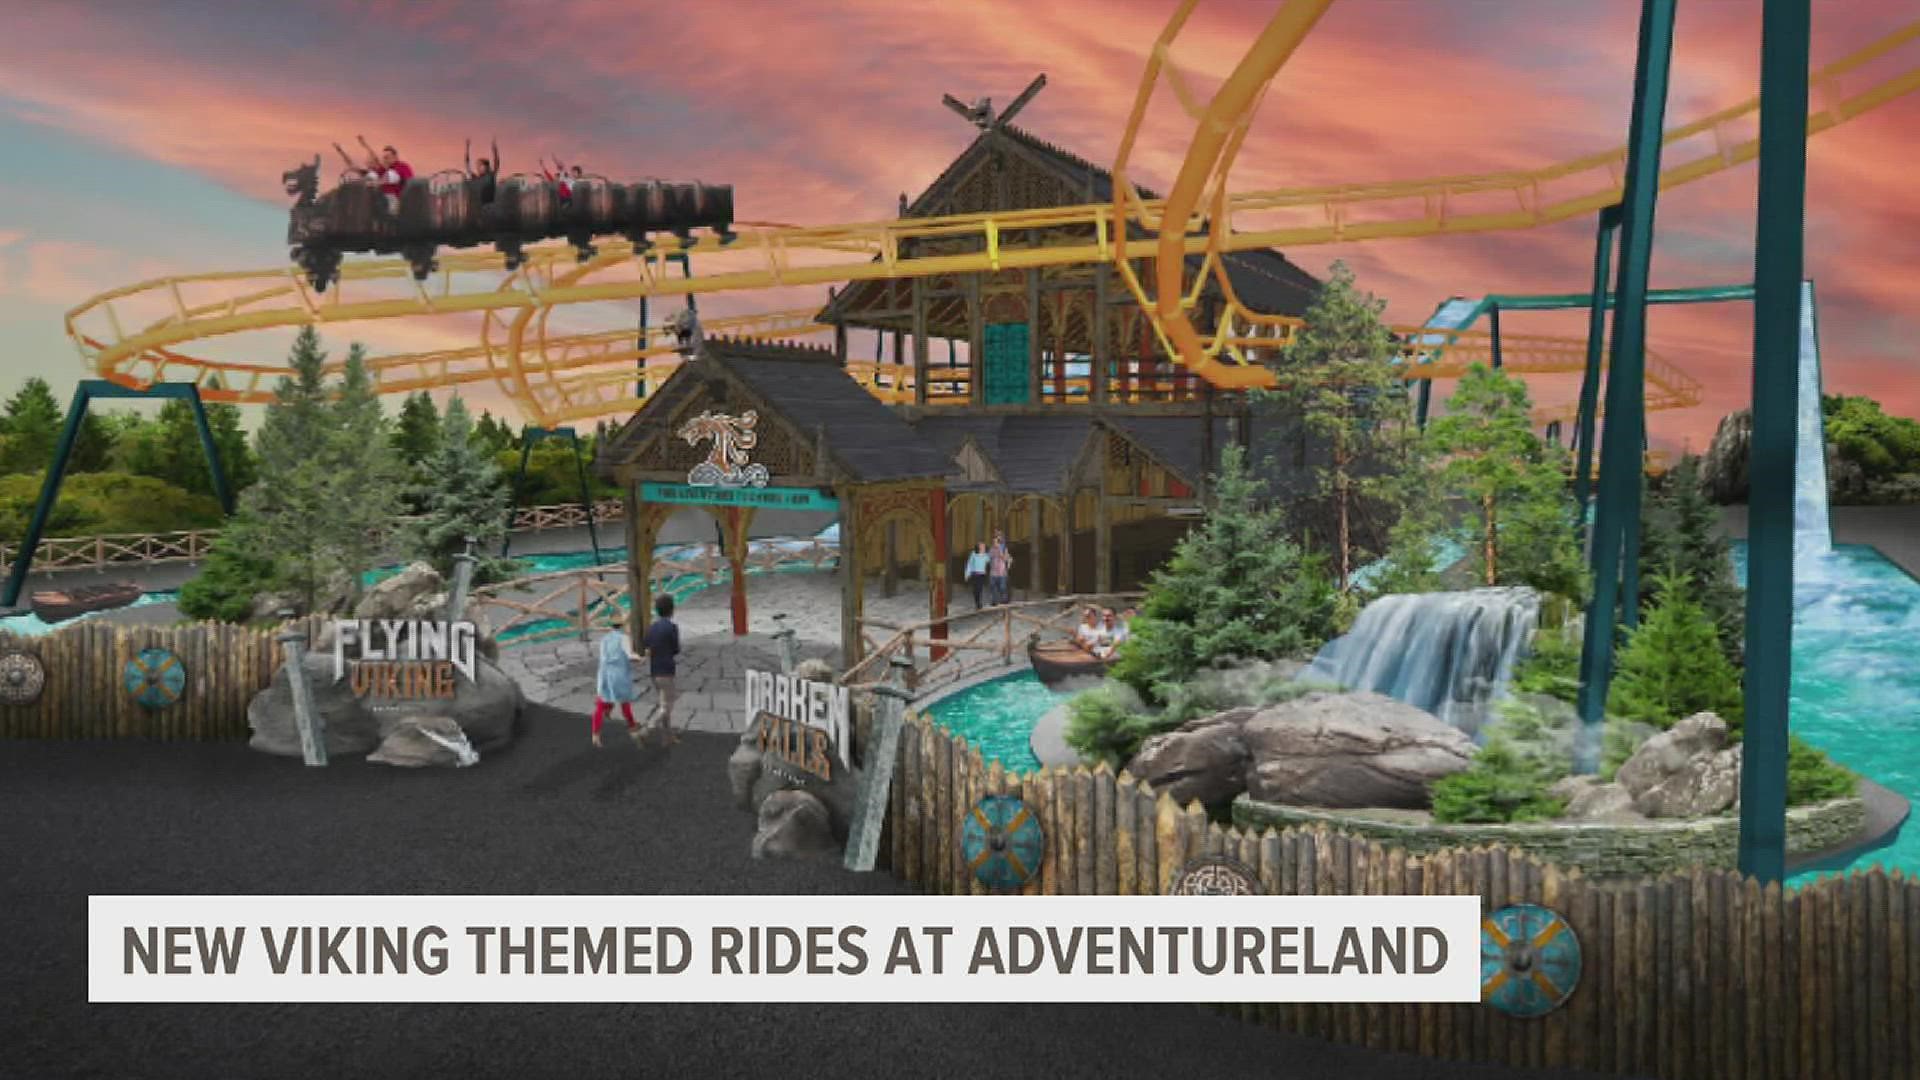 The rides are both viking themed. One new ride, Draken Falls, is a log flume ride. The other, Flying Viking, is a roller coaster containing 1300 feet of track.